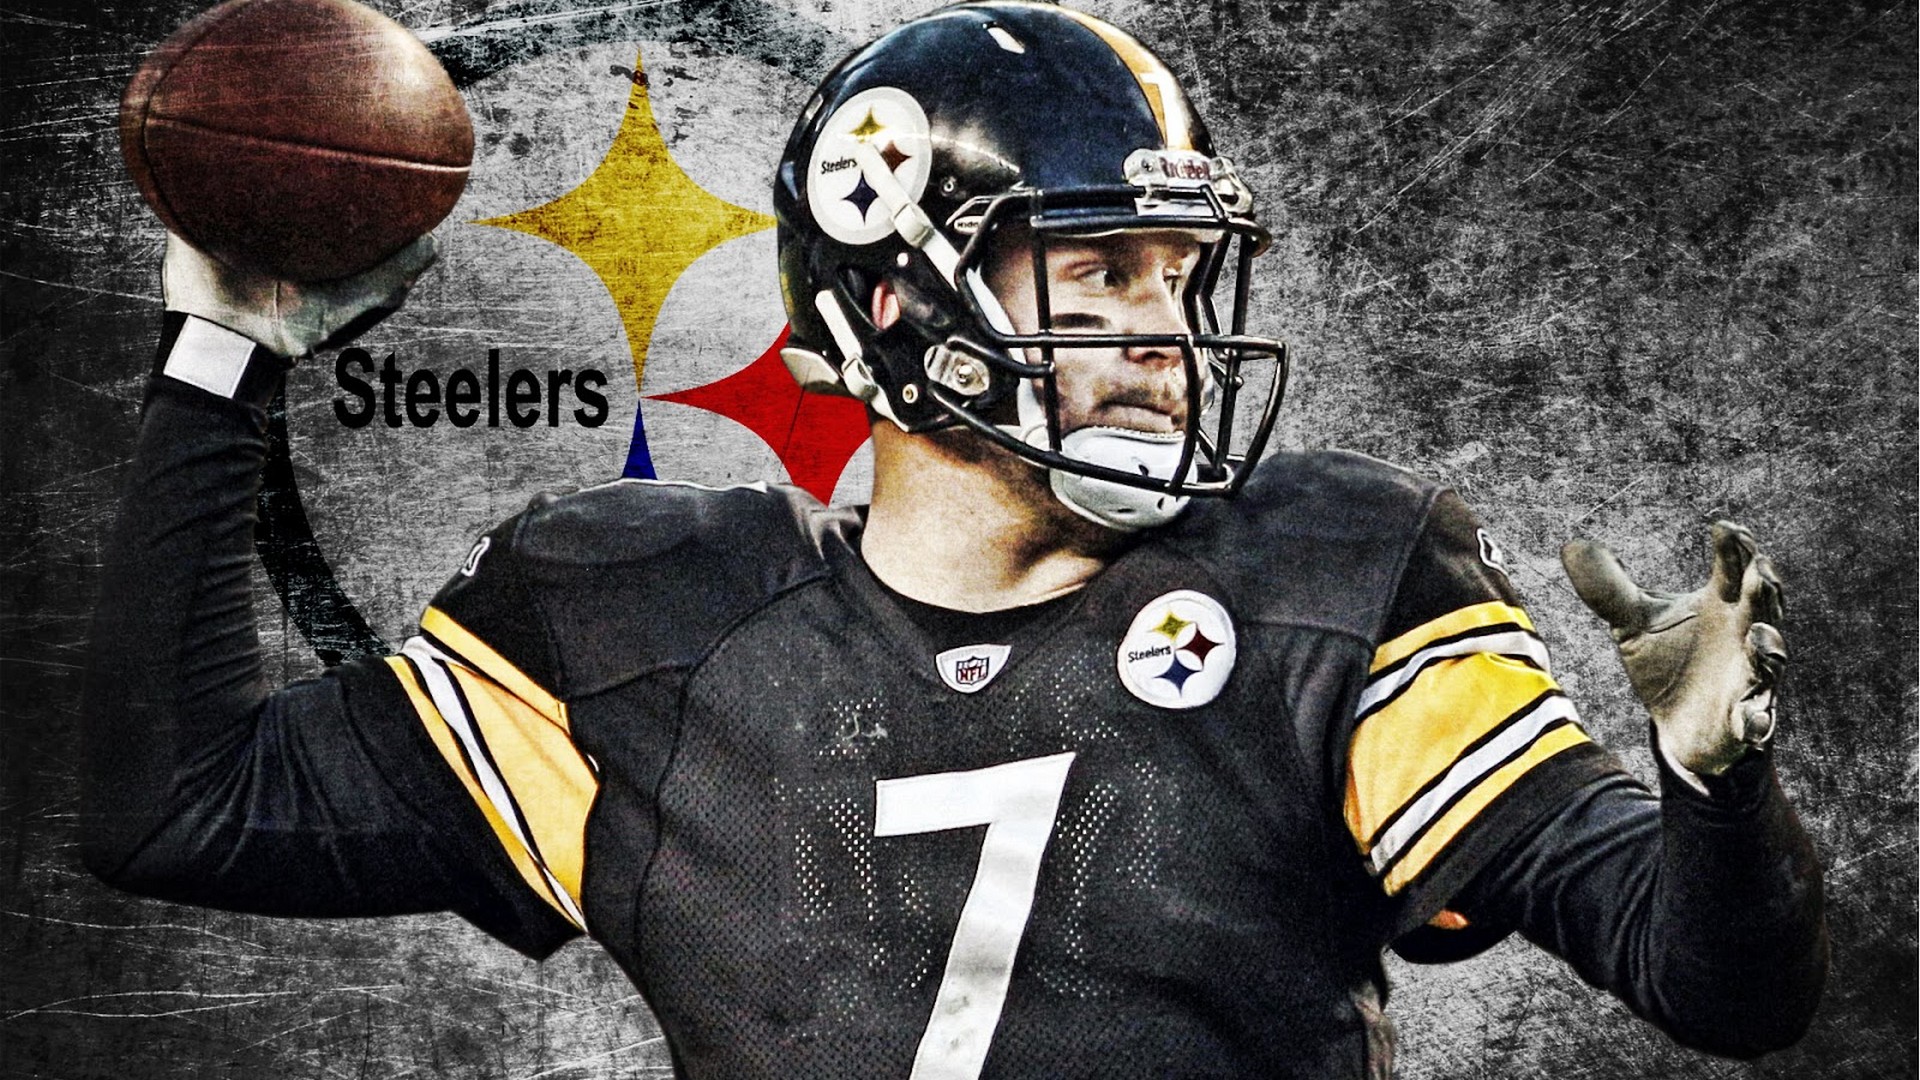 HD Steelers Super Bowl Backgrounds with resolution 1920x1080 pixel. You can make this wallpaper for your Mac or Windows Desktop Background, iPhone, Android or Tablet and another Smartphone device